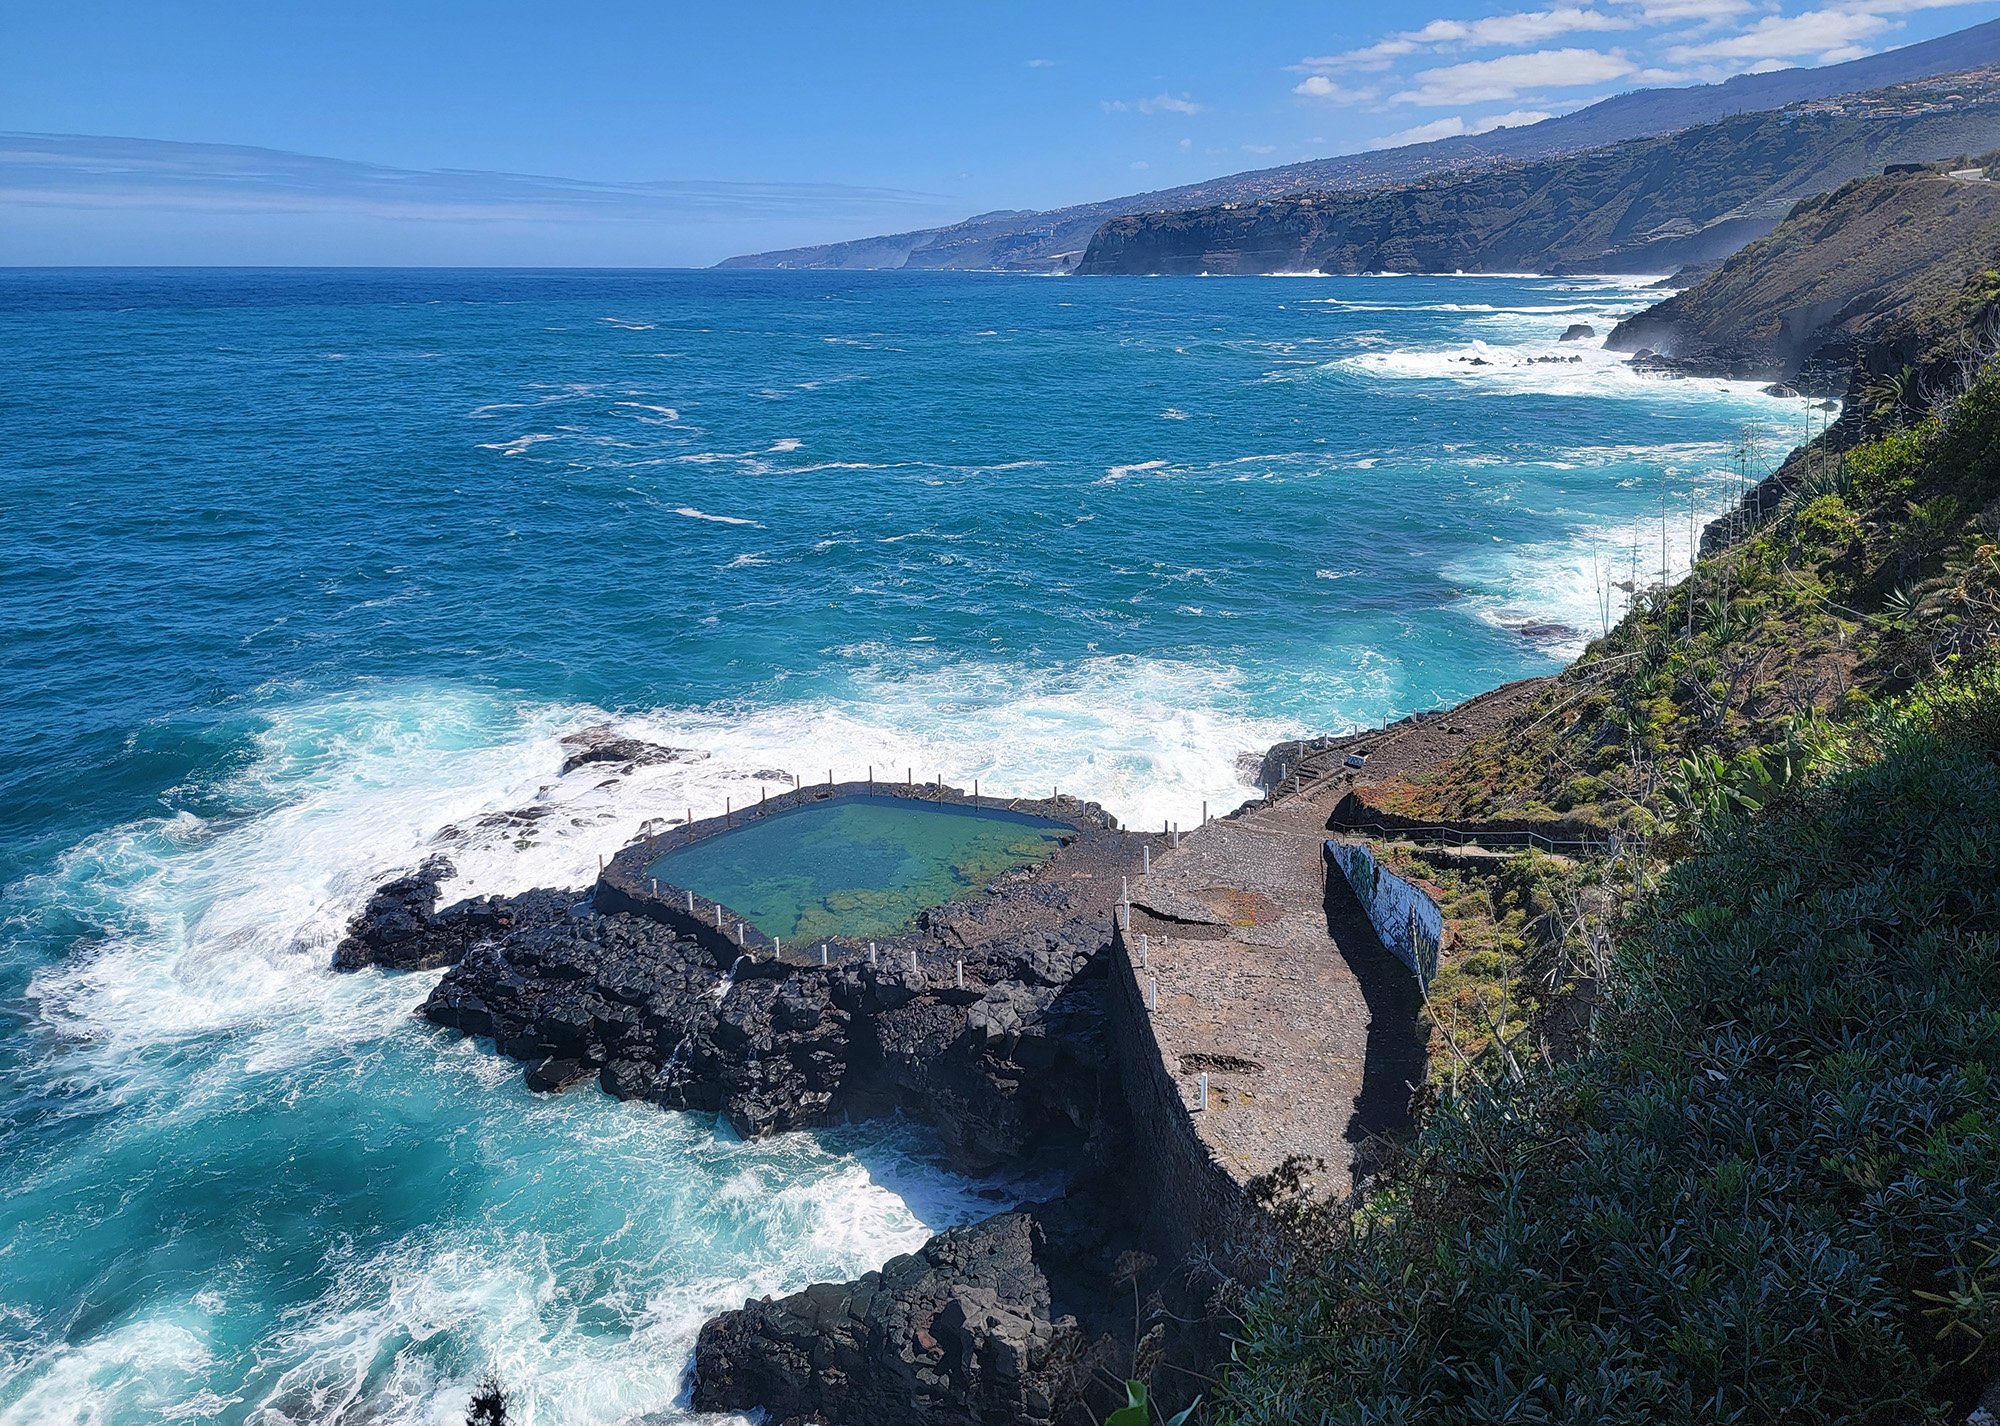 Natural pool near the cliffs in Puerto de la Cruz, which is probably the most beautiful city on Tenerife.